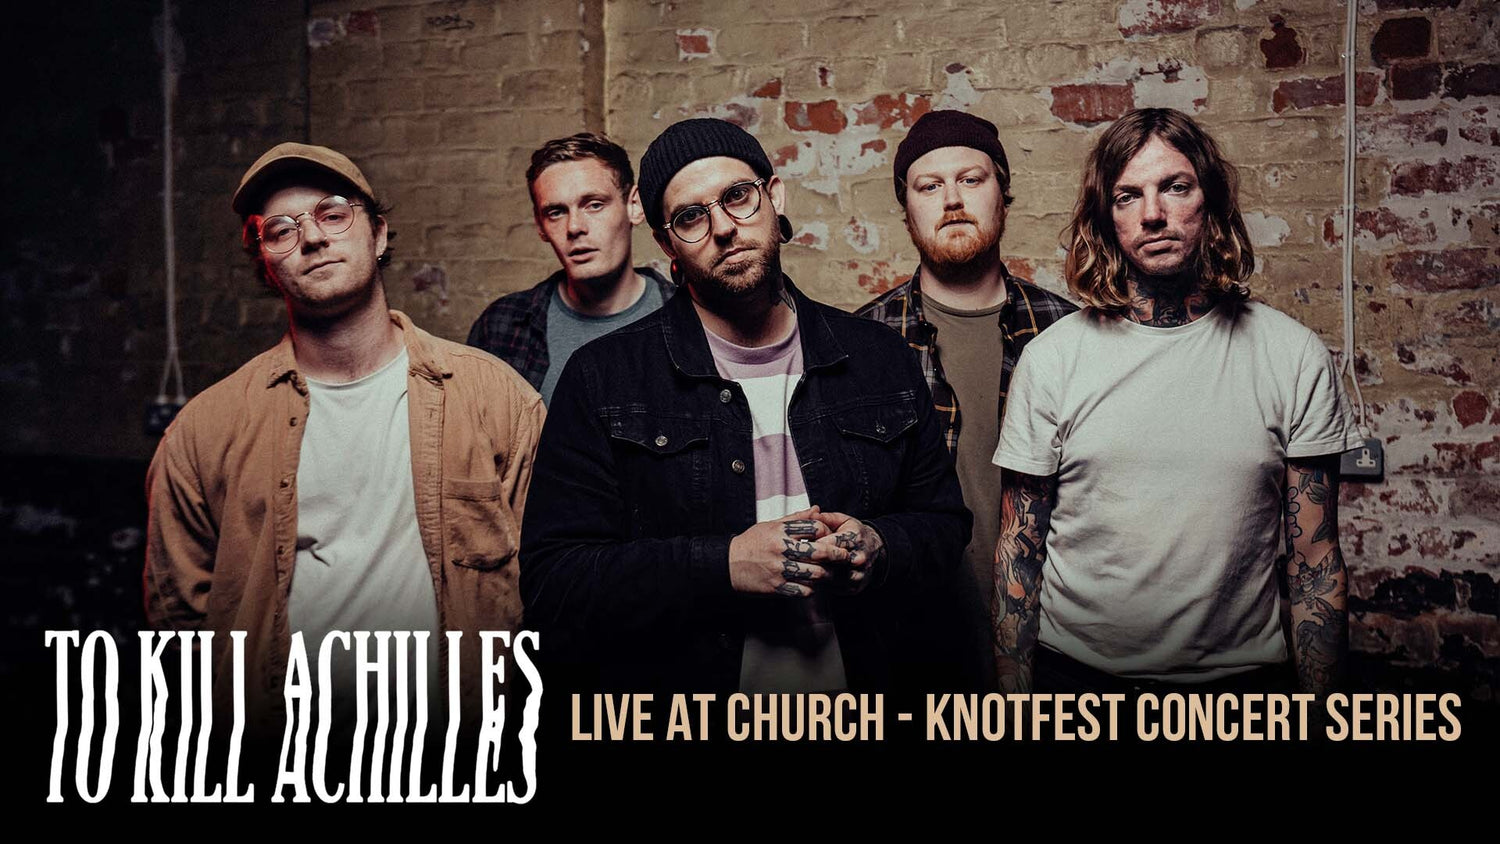 Knotfest Concert Series: To Kill Achilles ' Live at Church'